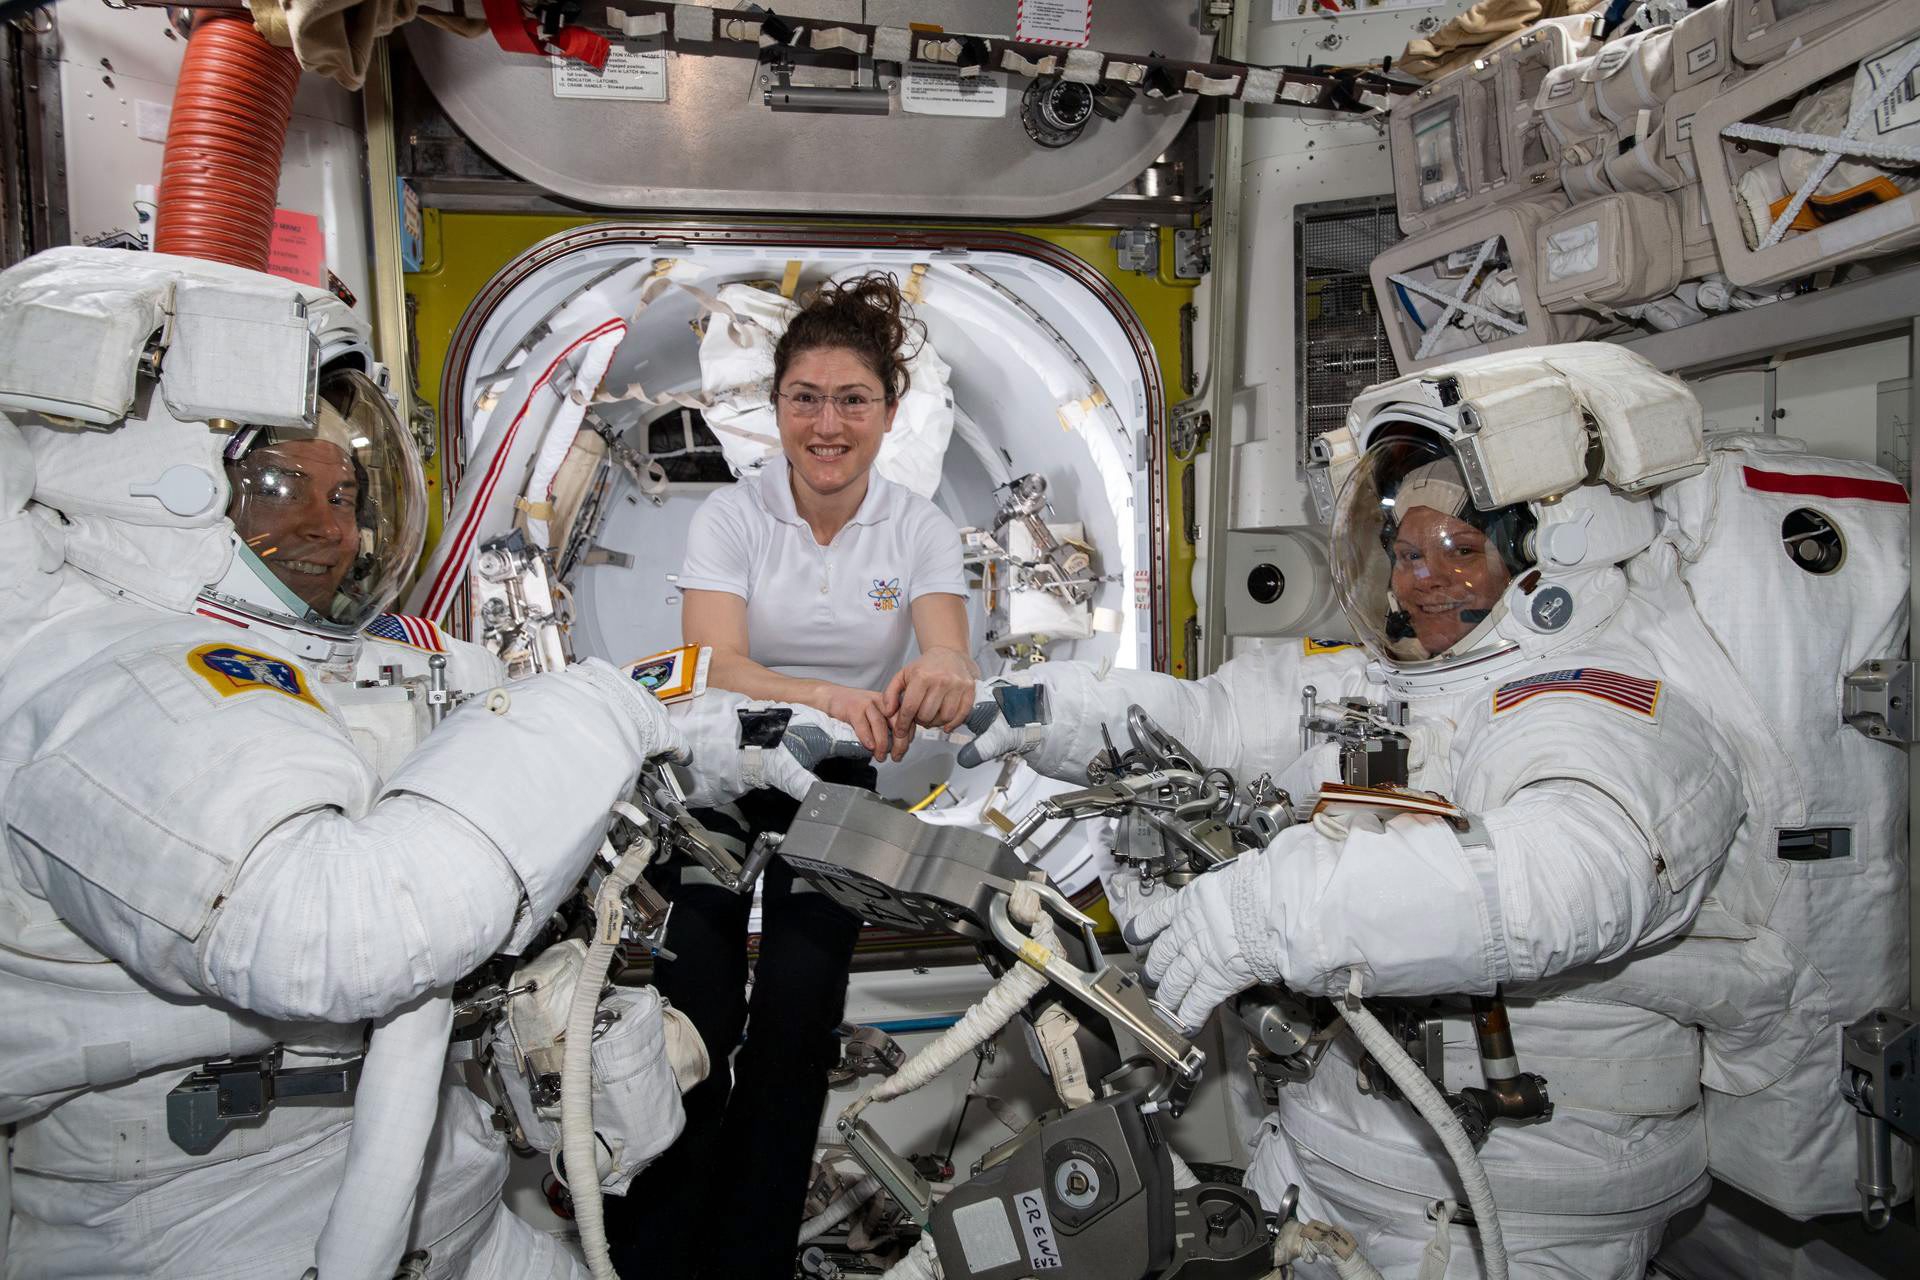 epa07464211 A handout photo made available by the NASA shows NASA astronaut Christina Koch (C) assists fellow astronauts Nick Hague (L) and Anne McClain (R) in their US spacesuits shortly before they begin the first spacewalk of their careers, aboard the International Space Station (ISS), 22 March 2019 (issued 26 March 2019). The NASA on 26 March 2019 said it has cancelled the first all-female spacewalk which was scheduled for 29 March 2019, citing spacesuit issues.  EPA/NASA / HANDOUT  HANDOUT EDITORIAL USE ONLY/NO SALES SPACE ISS SPACEWALK CANCELLED